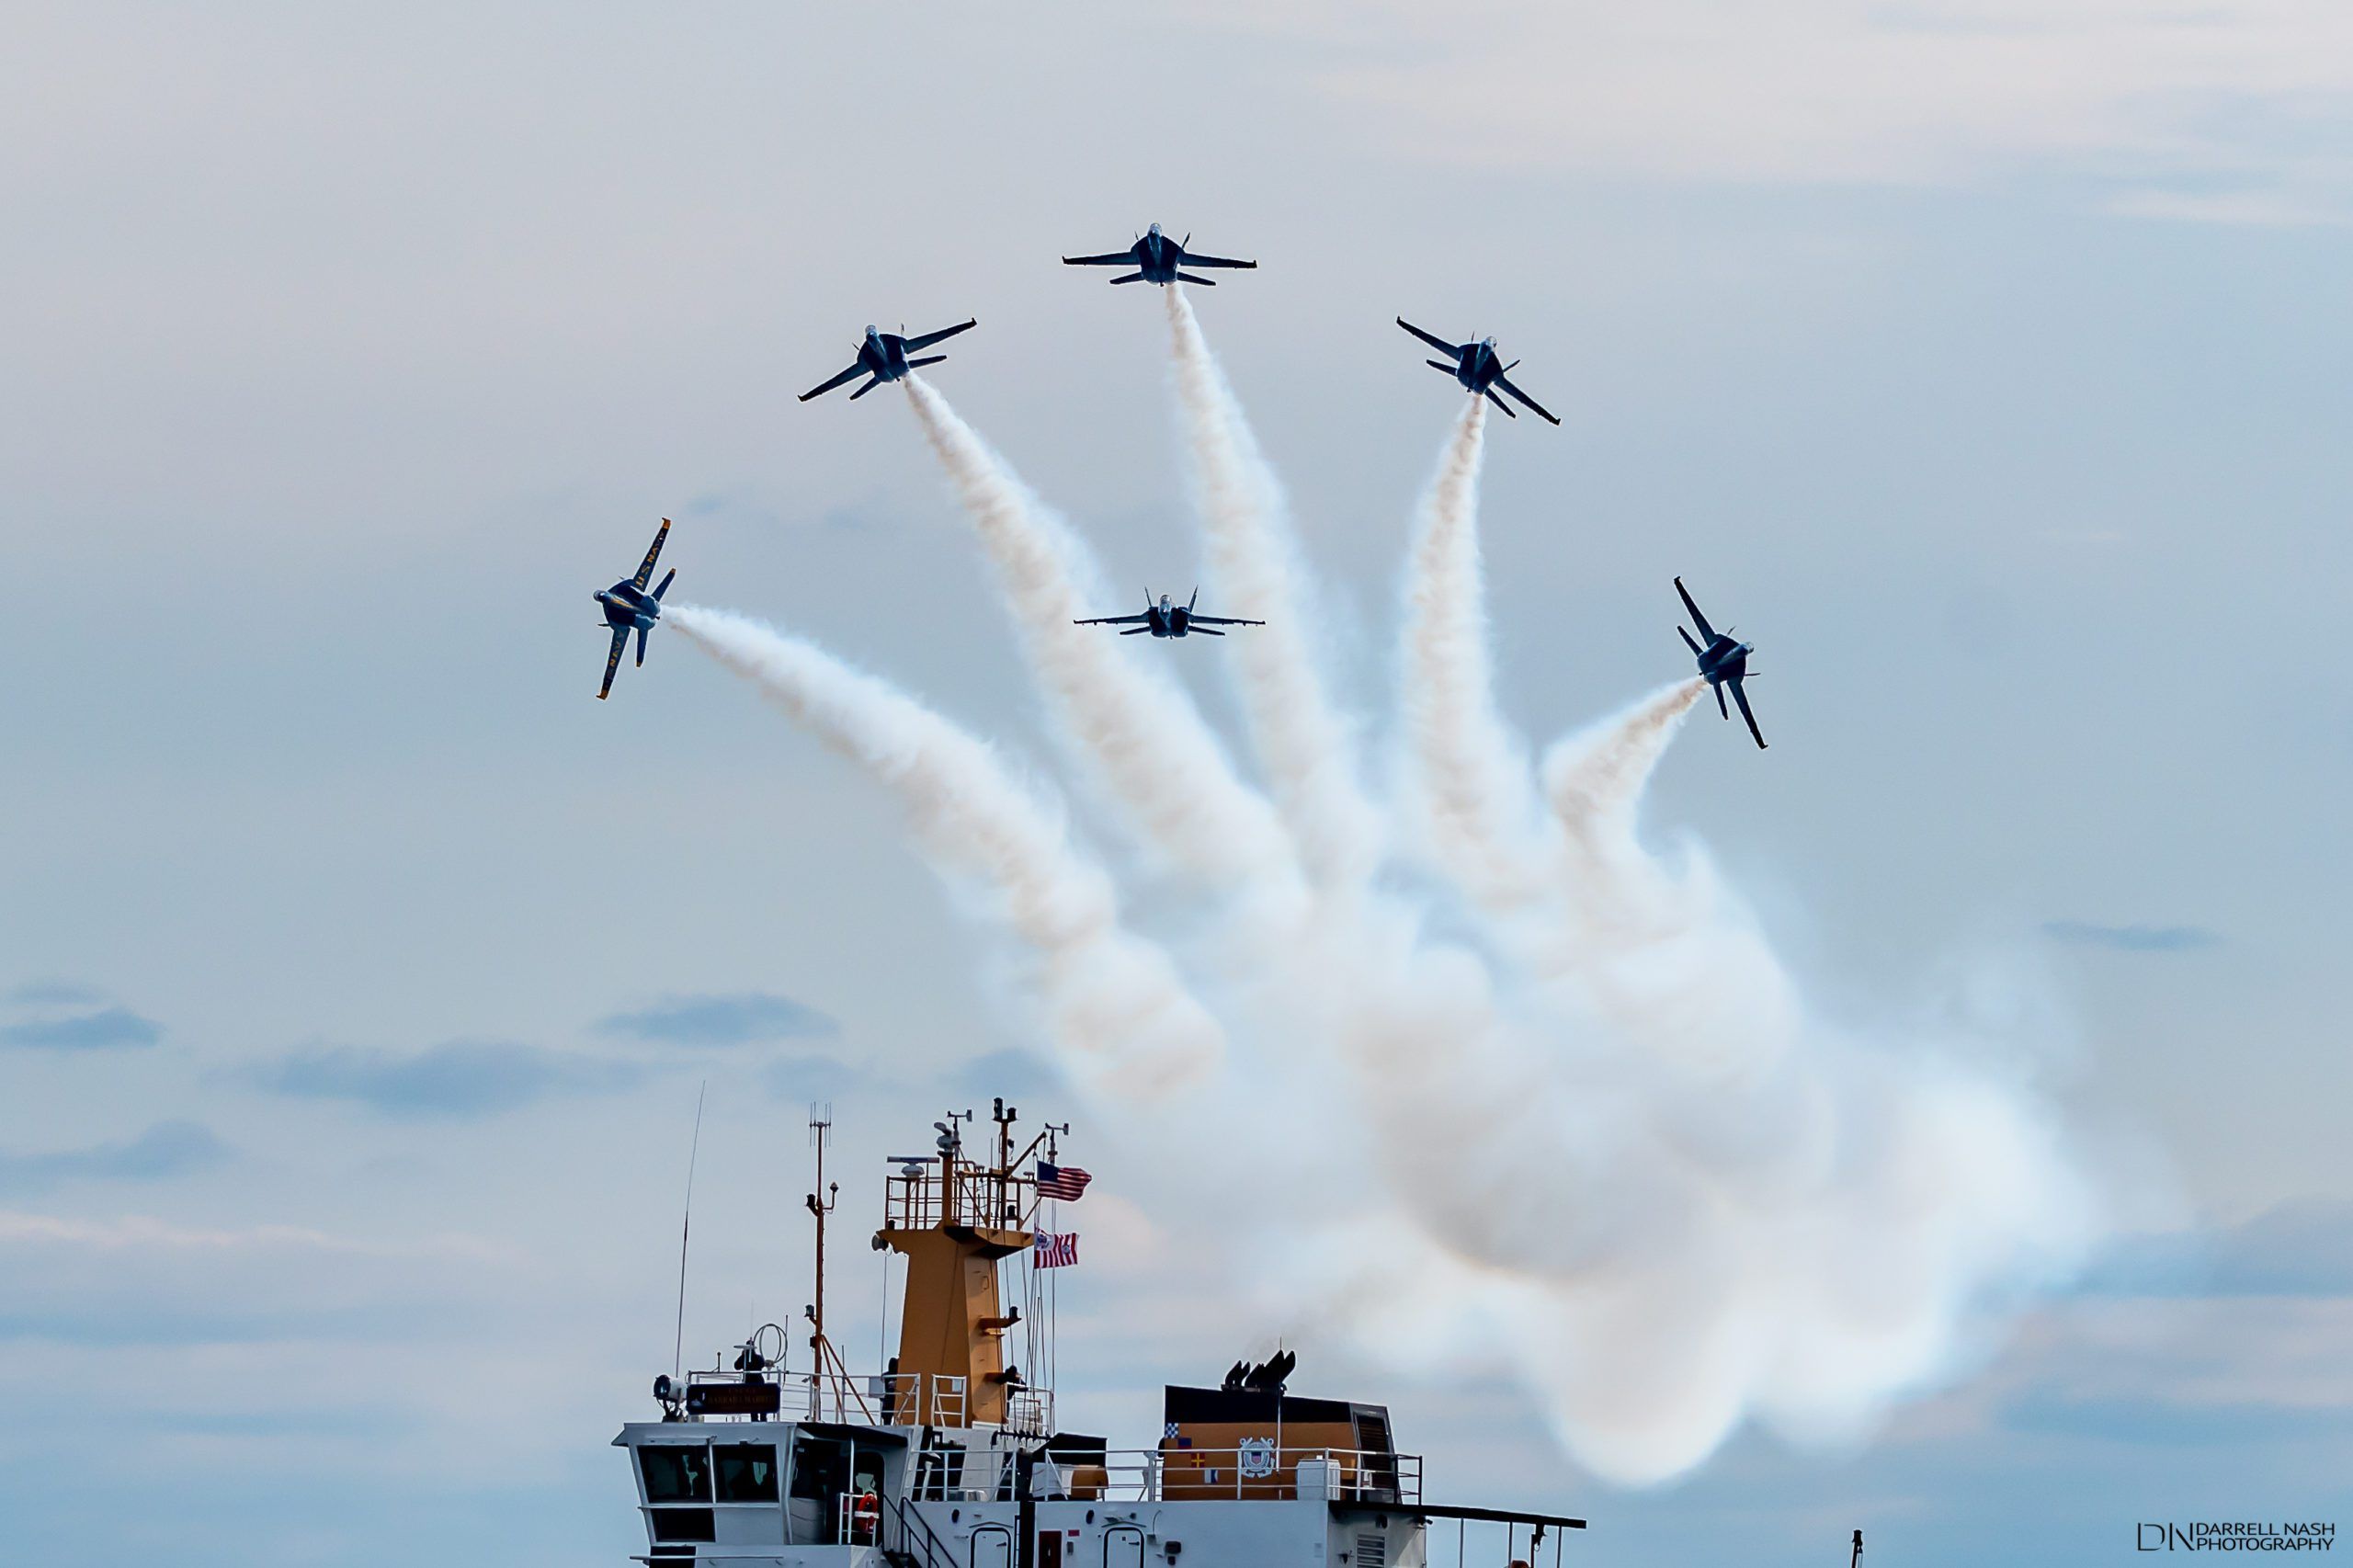 Today's Photo of the Day comes from Darrell Nash. Darrell captured this photo of the Blue Angels at their homecoming show on Pensacola Beach back on Nov. 5.